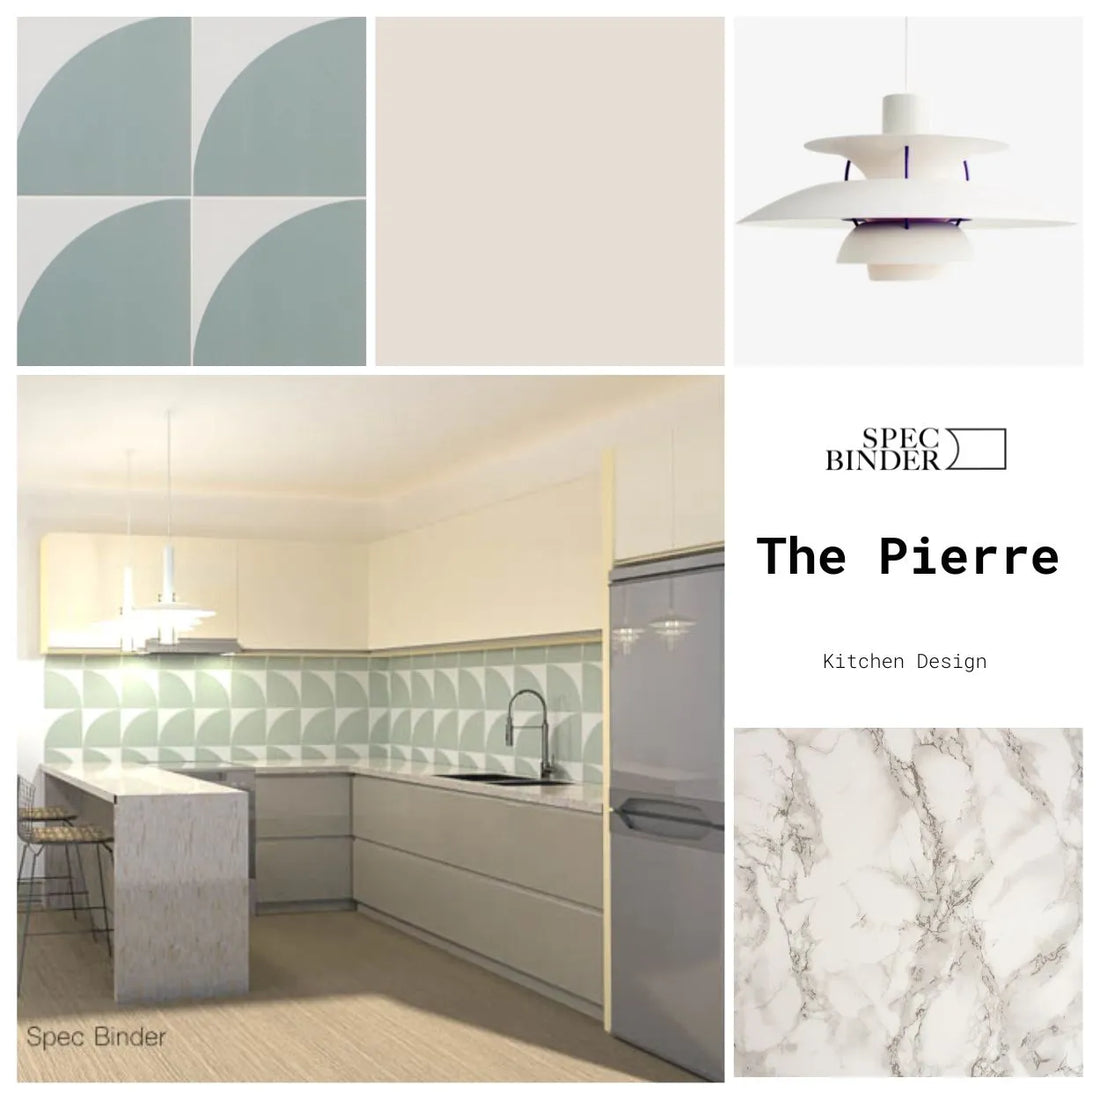 The Pierre Kitchen cover page with inspiration photos, renderings, materials, and design elements. The Pierre is Mod, Fresh, Light, and Neutral